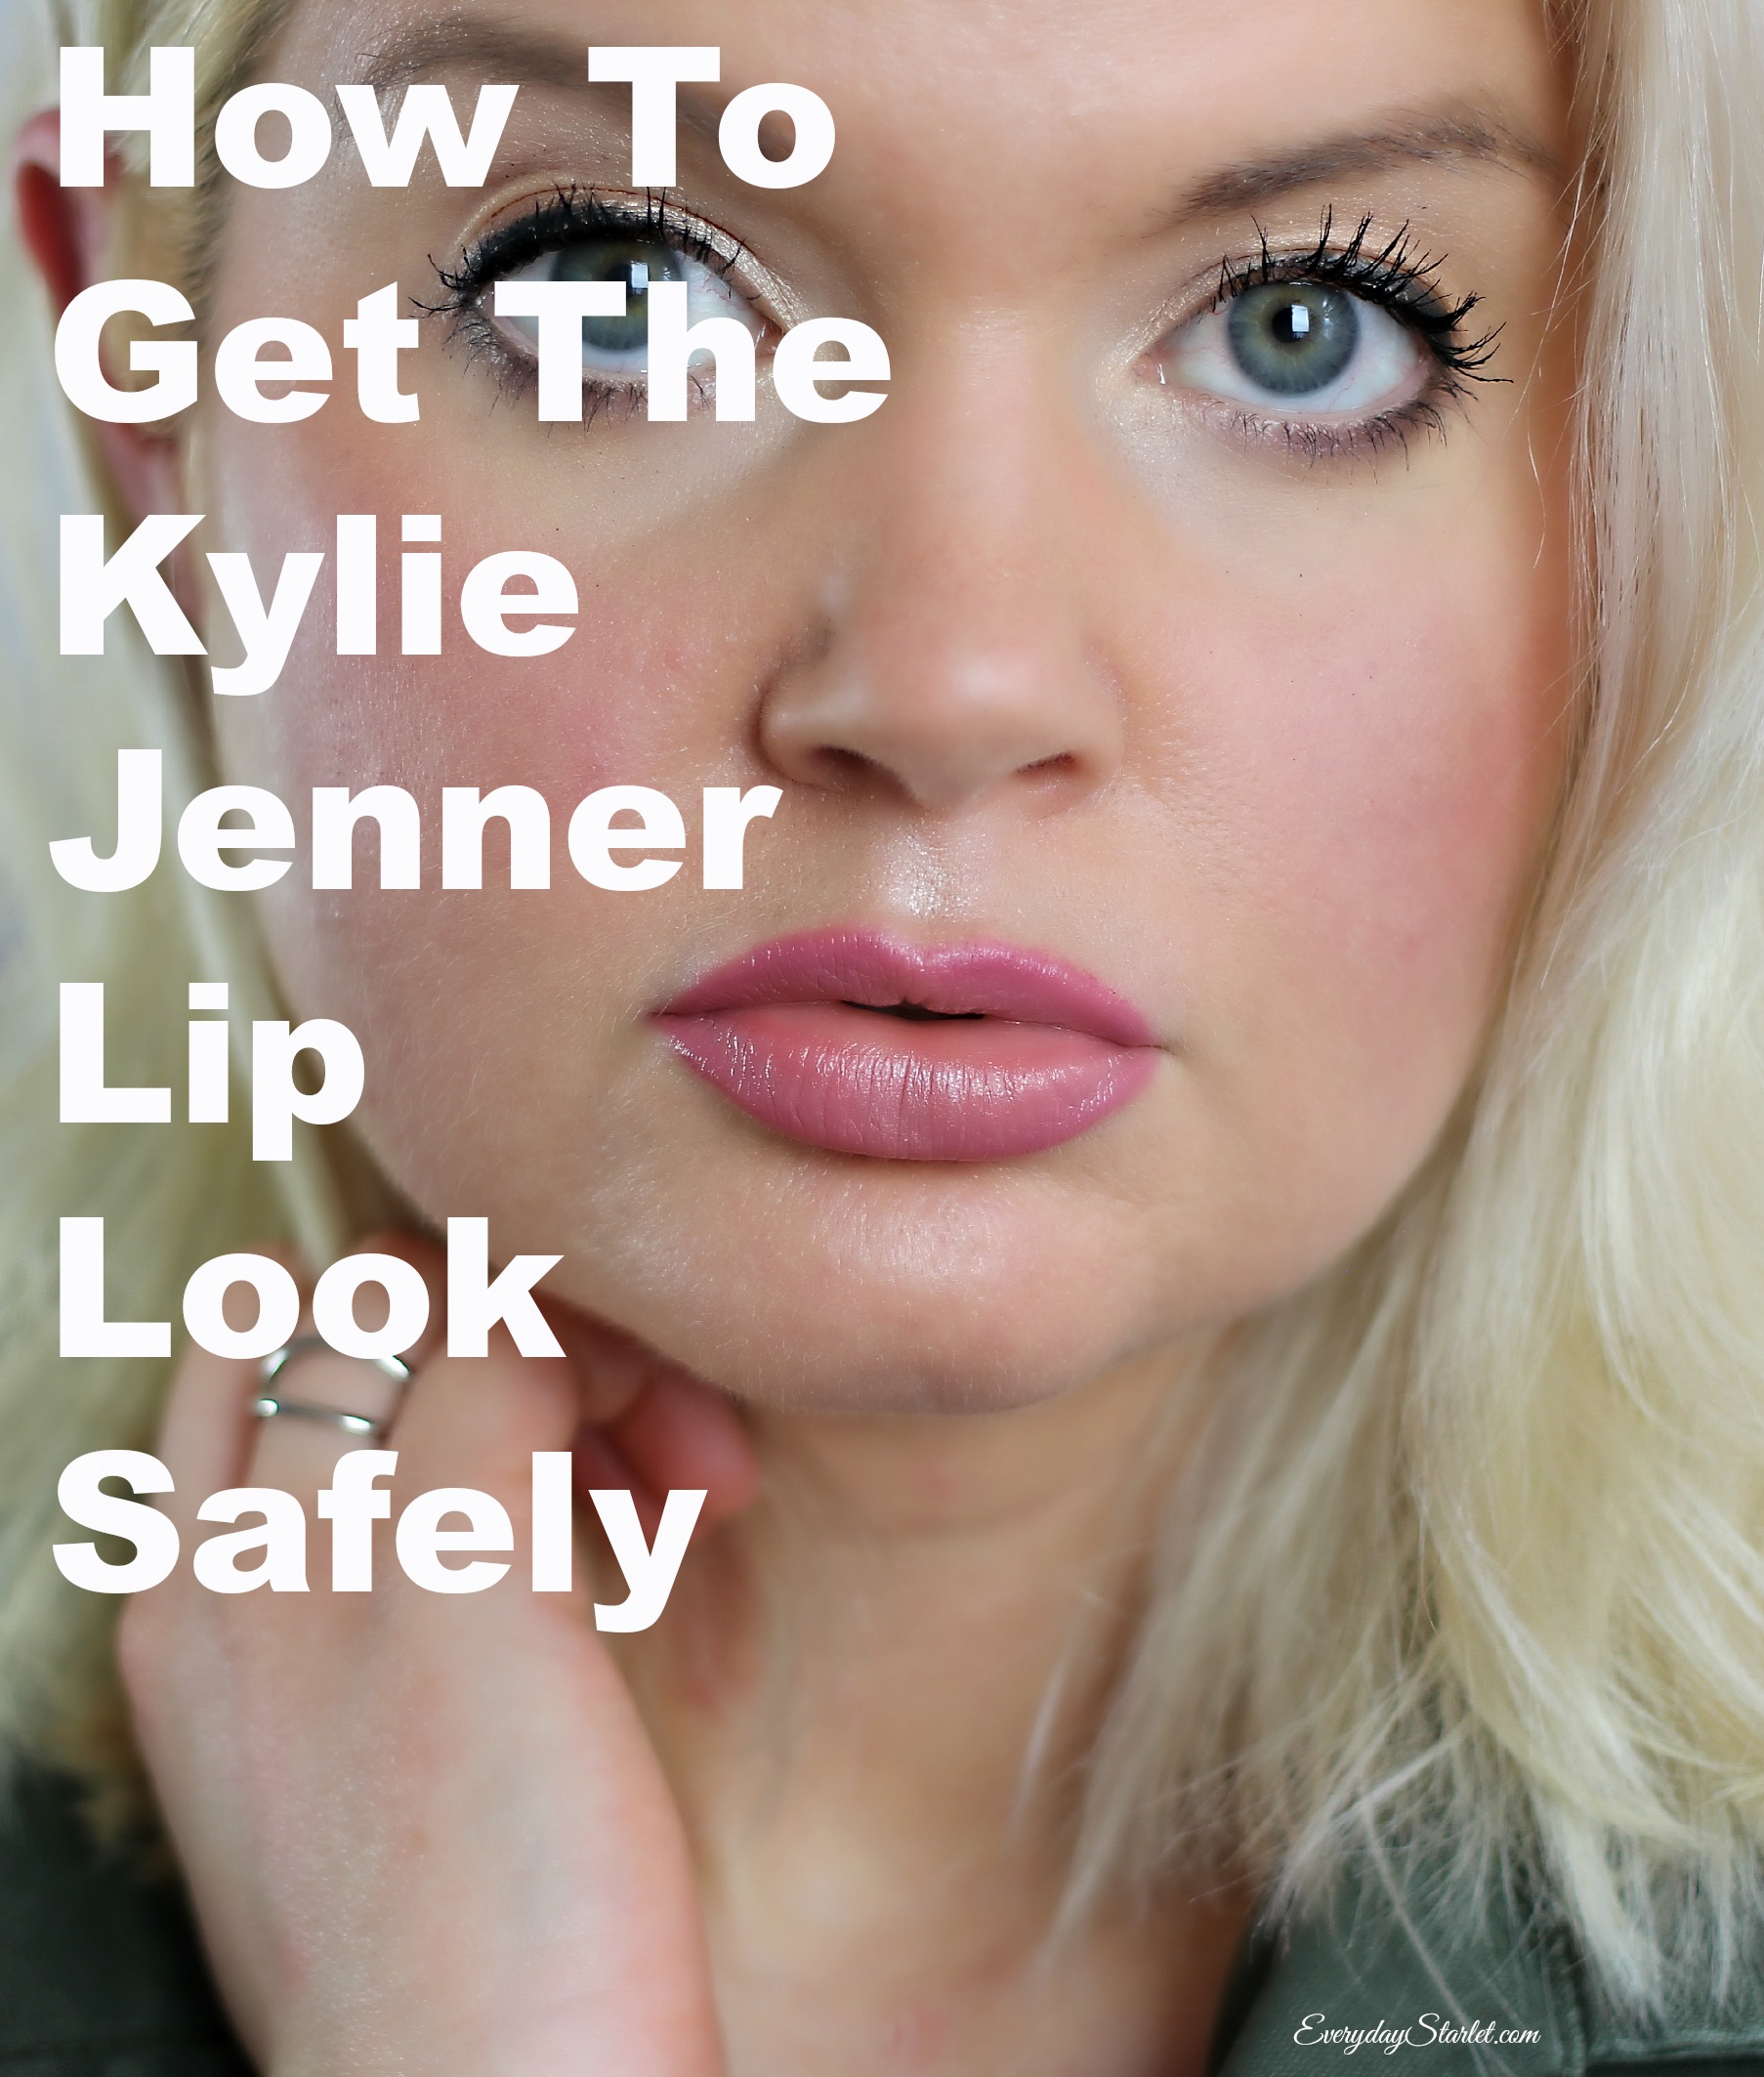 How to get the Kylie Jenner Lip look Safely